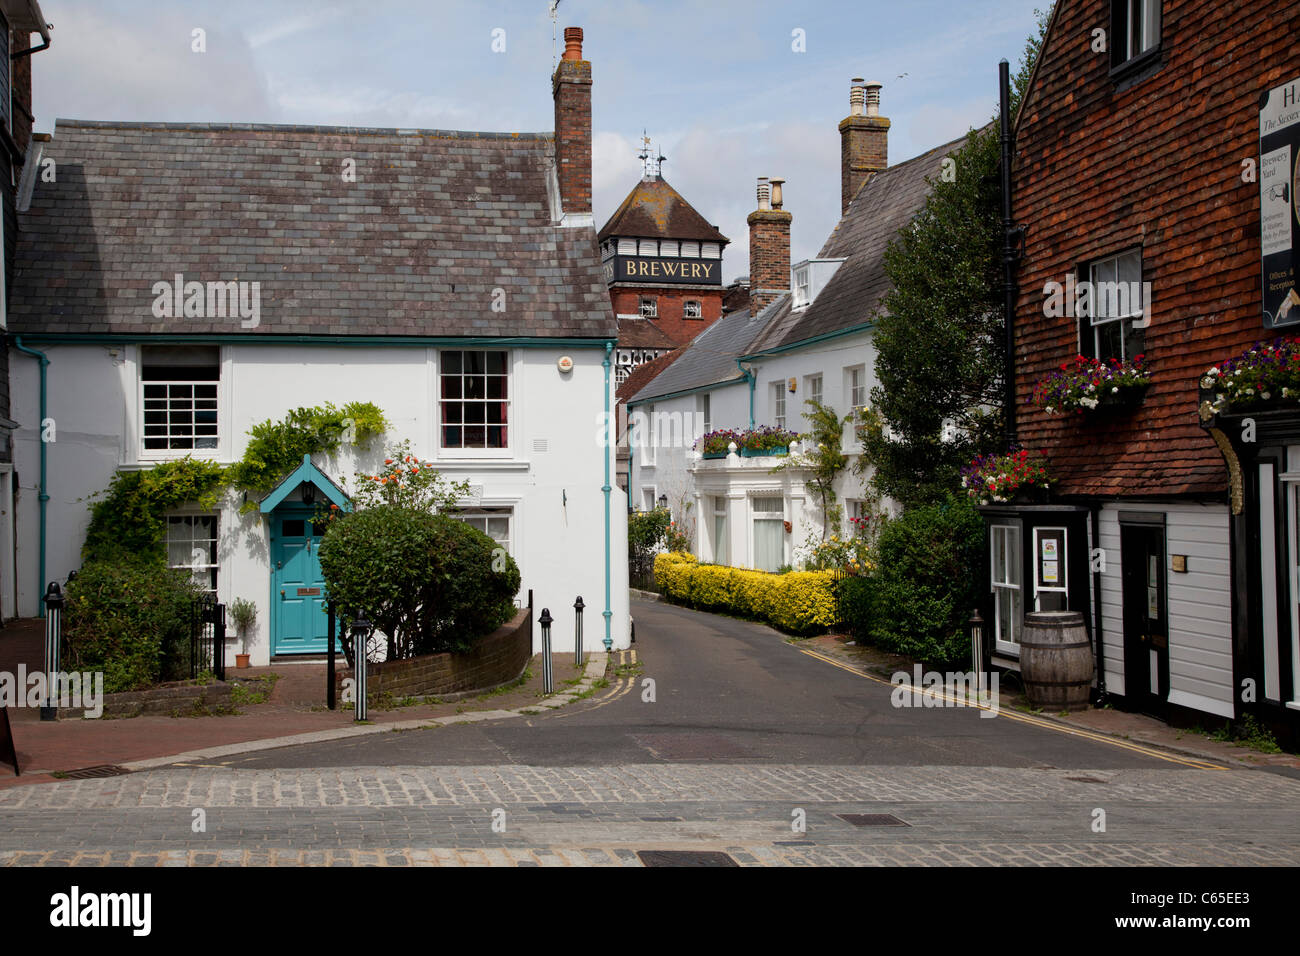 High street and entrance to harveys brewery, Lewes, Sussex,UK - Town scenes Stock Photo